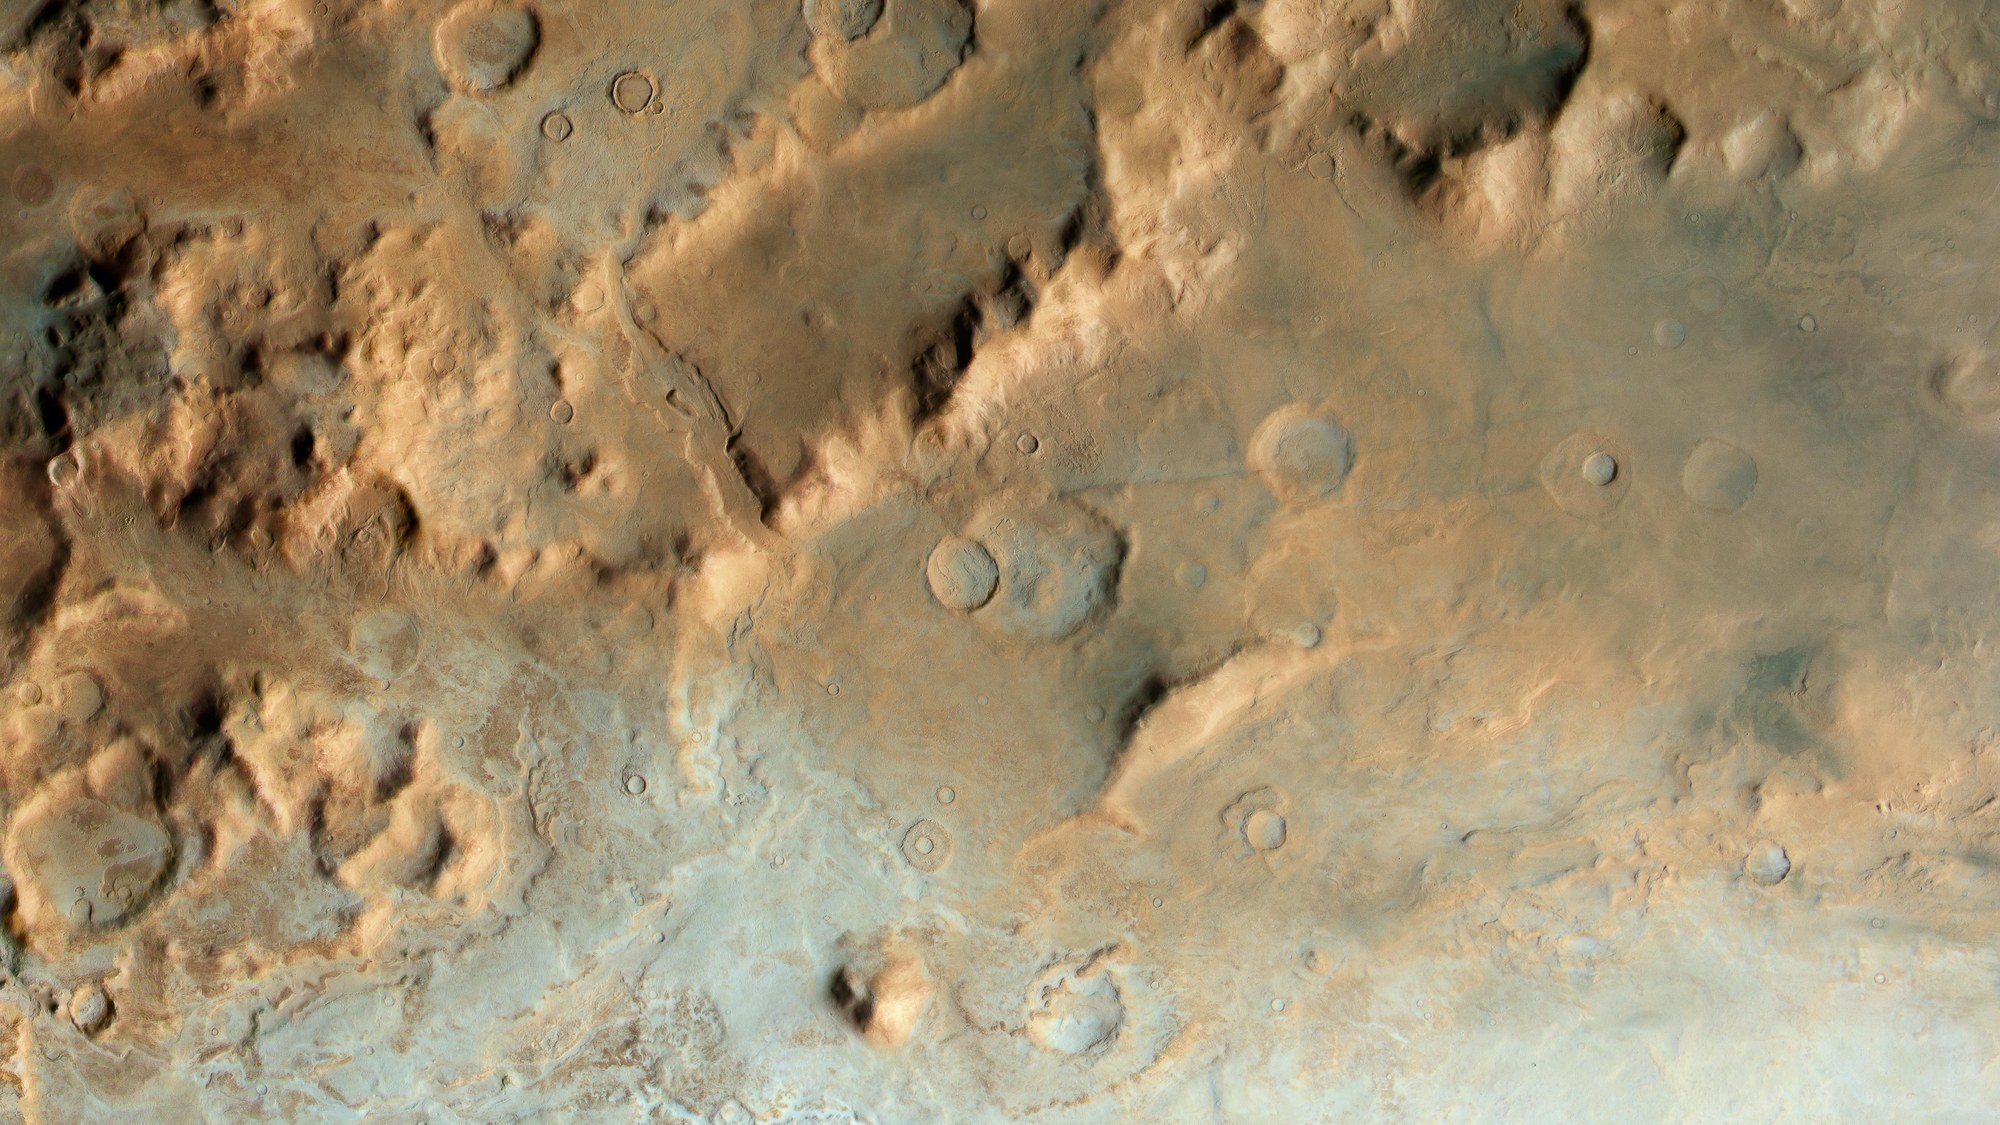 Section of the western rim of the crater Hellas